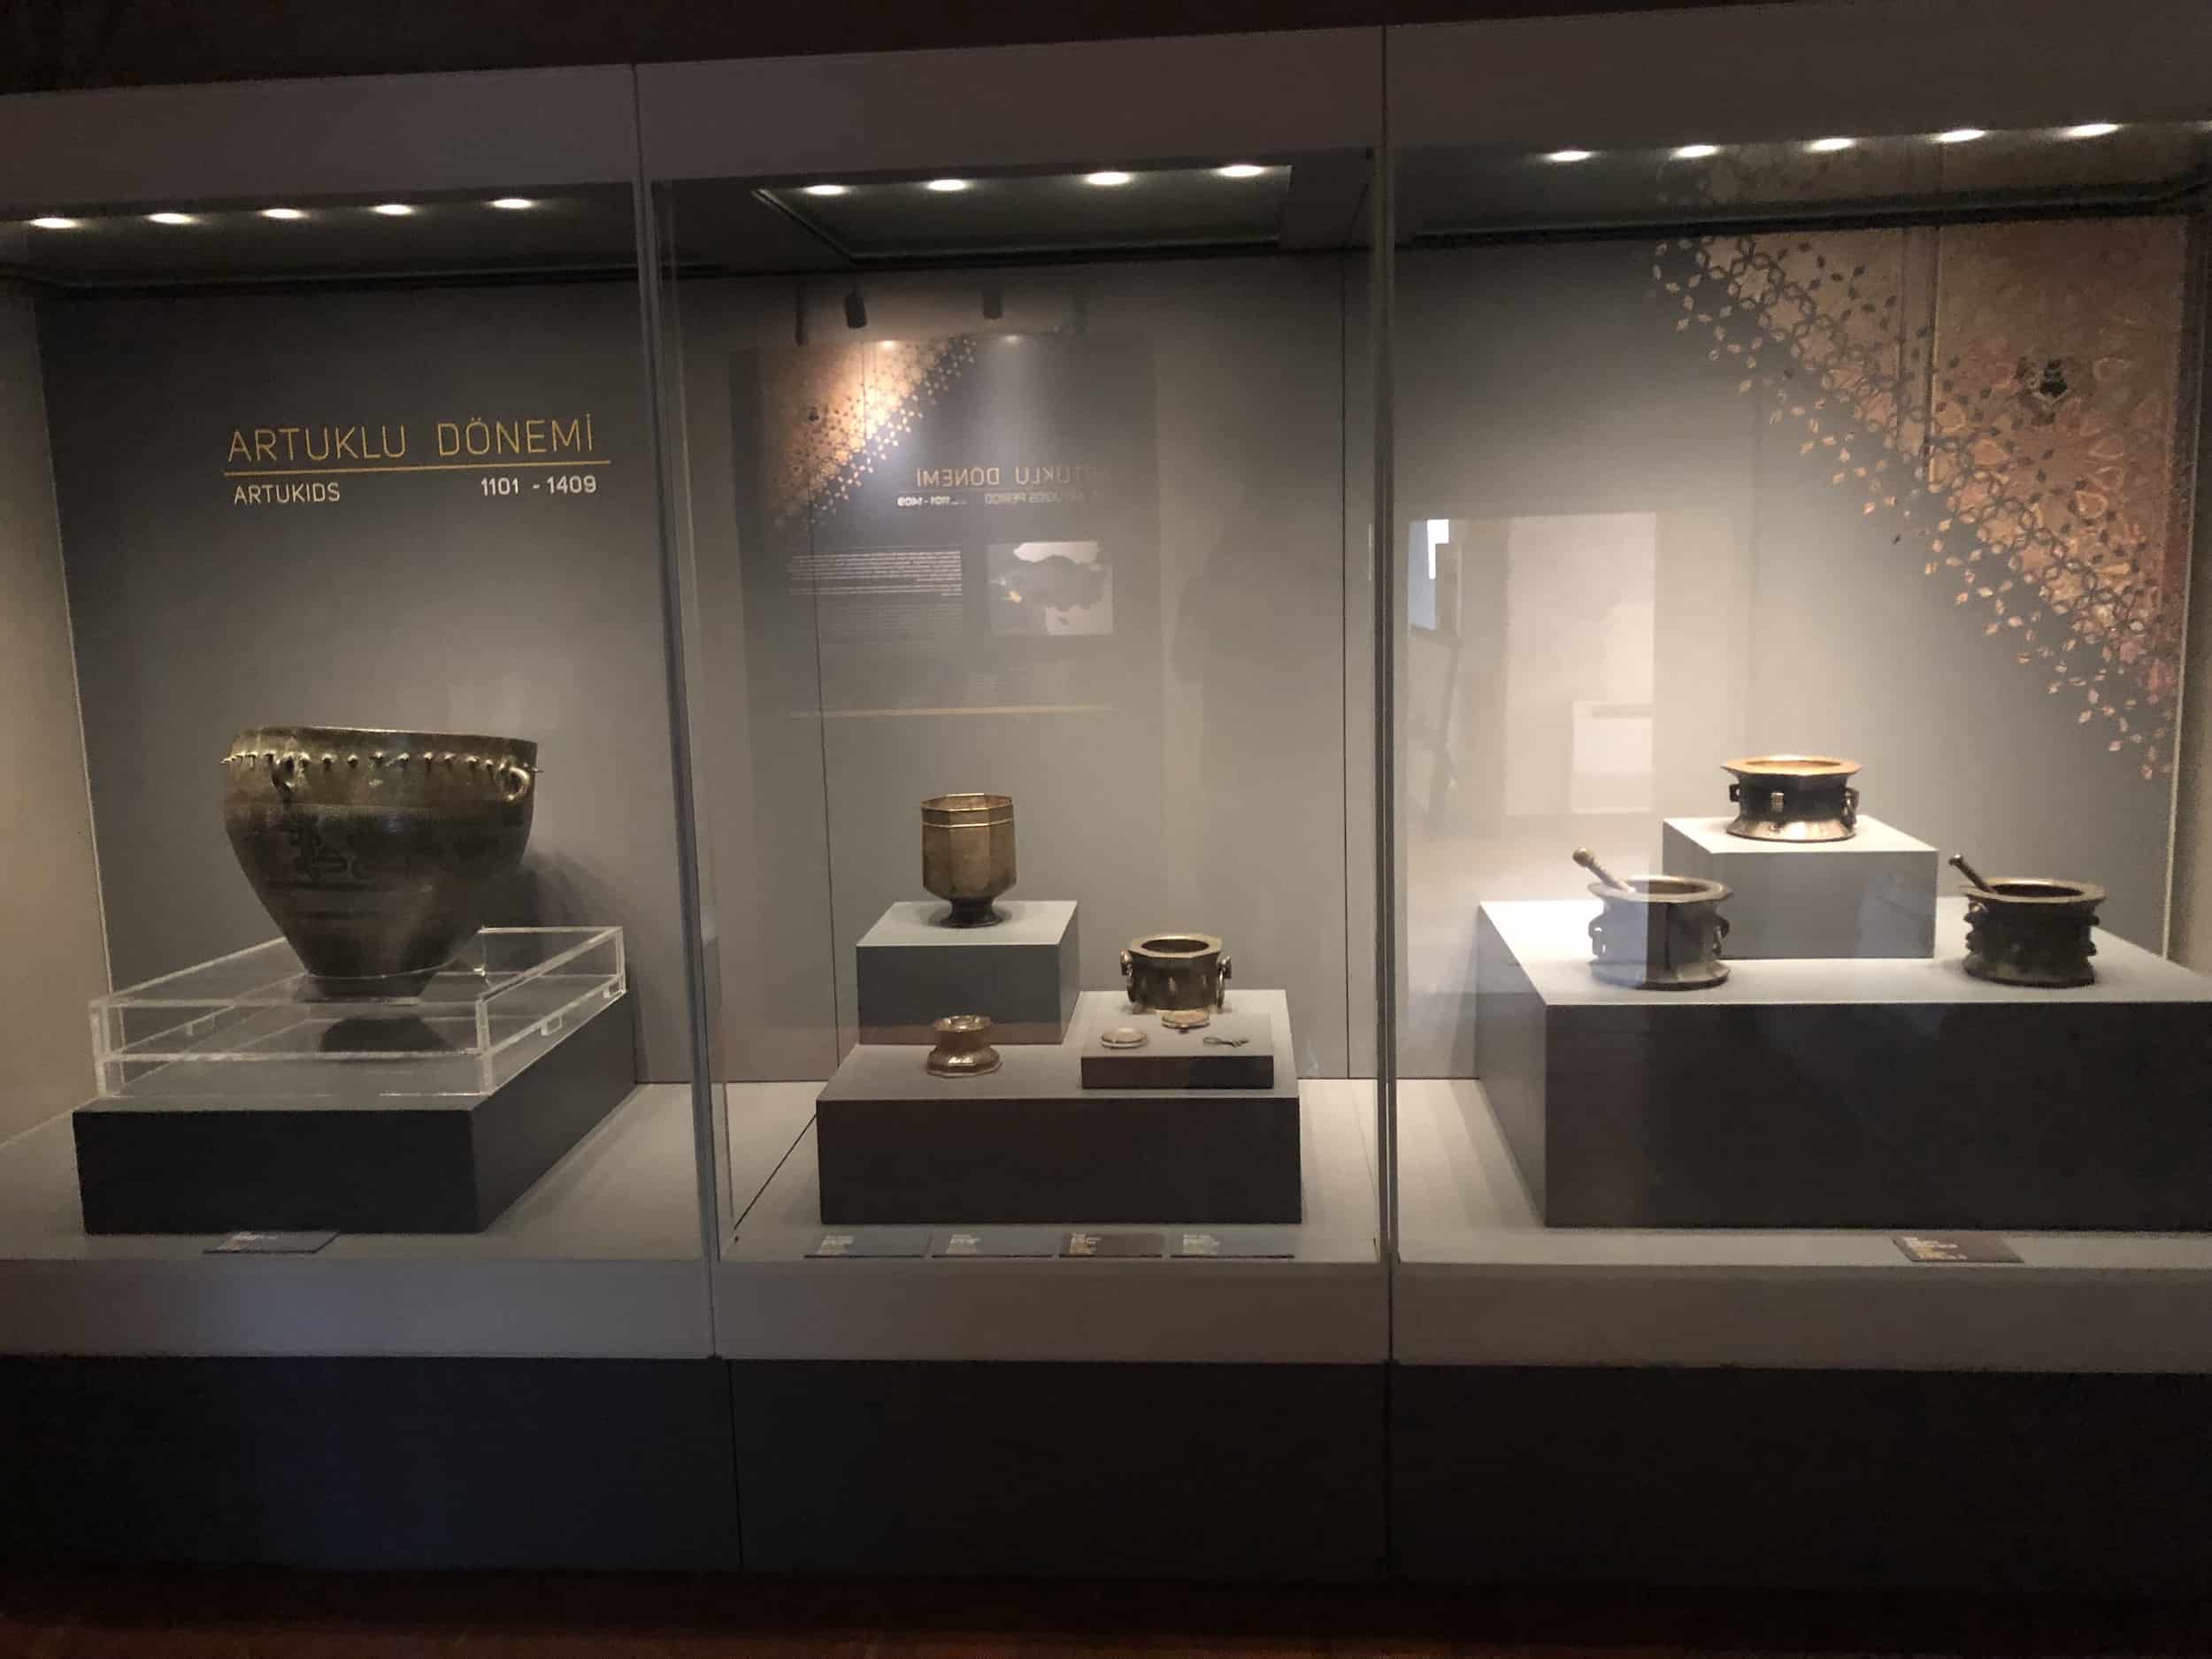 Artuqid Period at the Museum of Turkish and Islamic Arts in Istanbul, Turkey